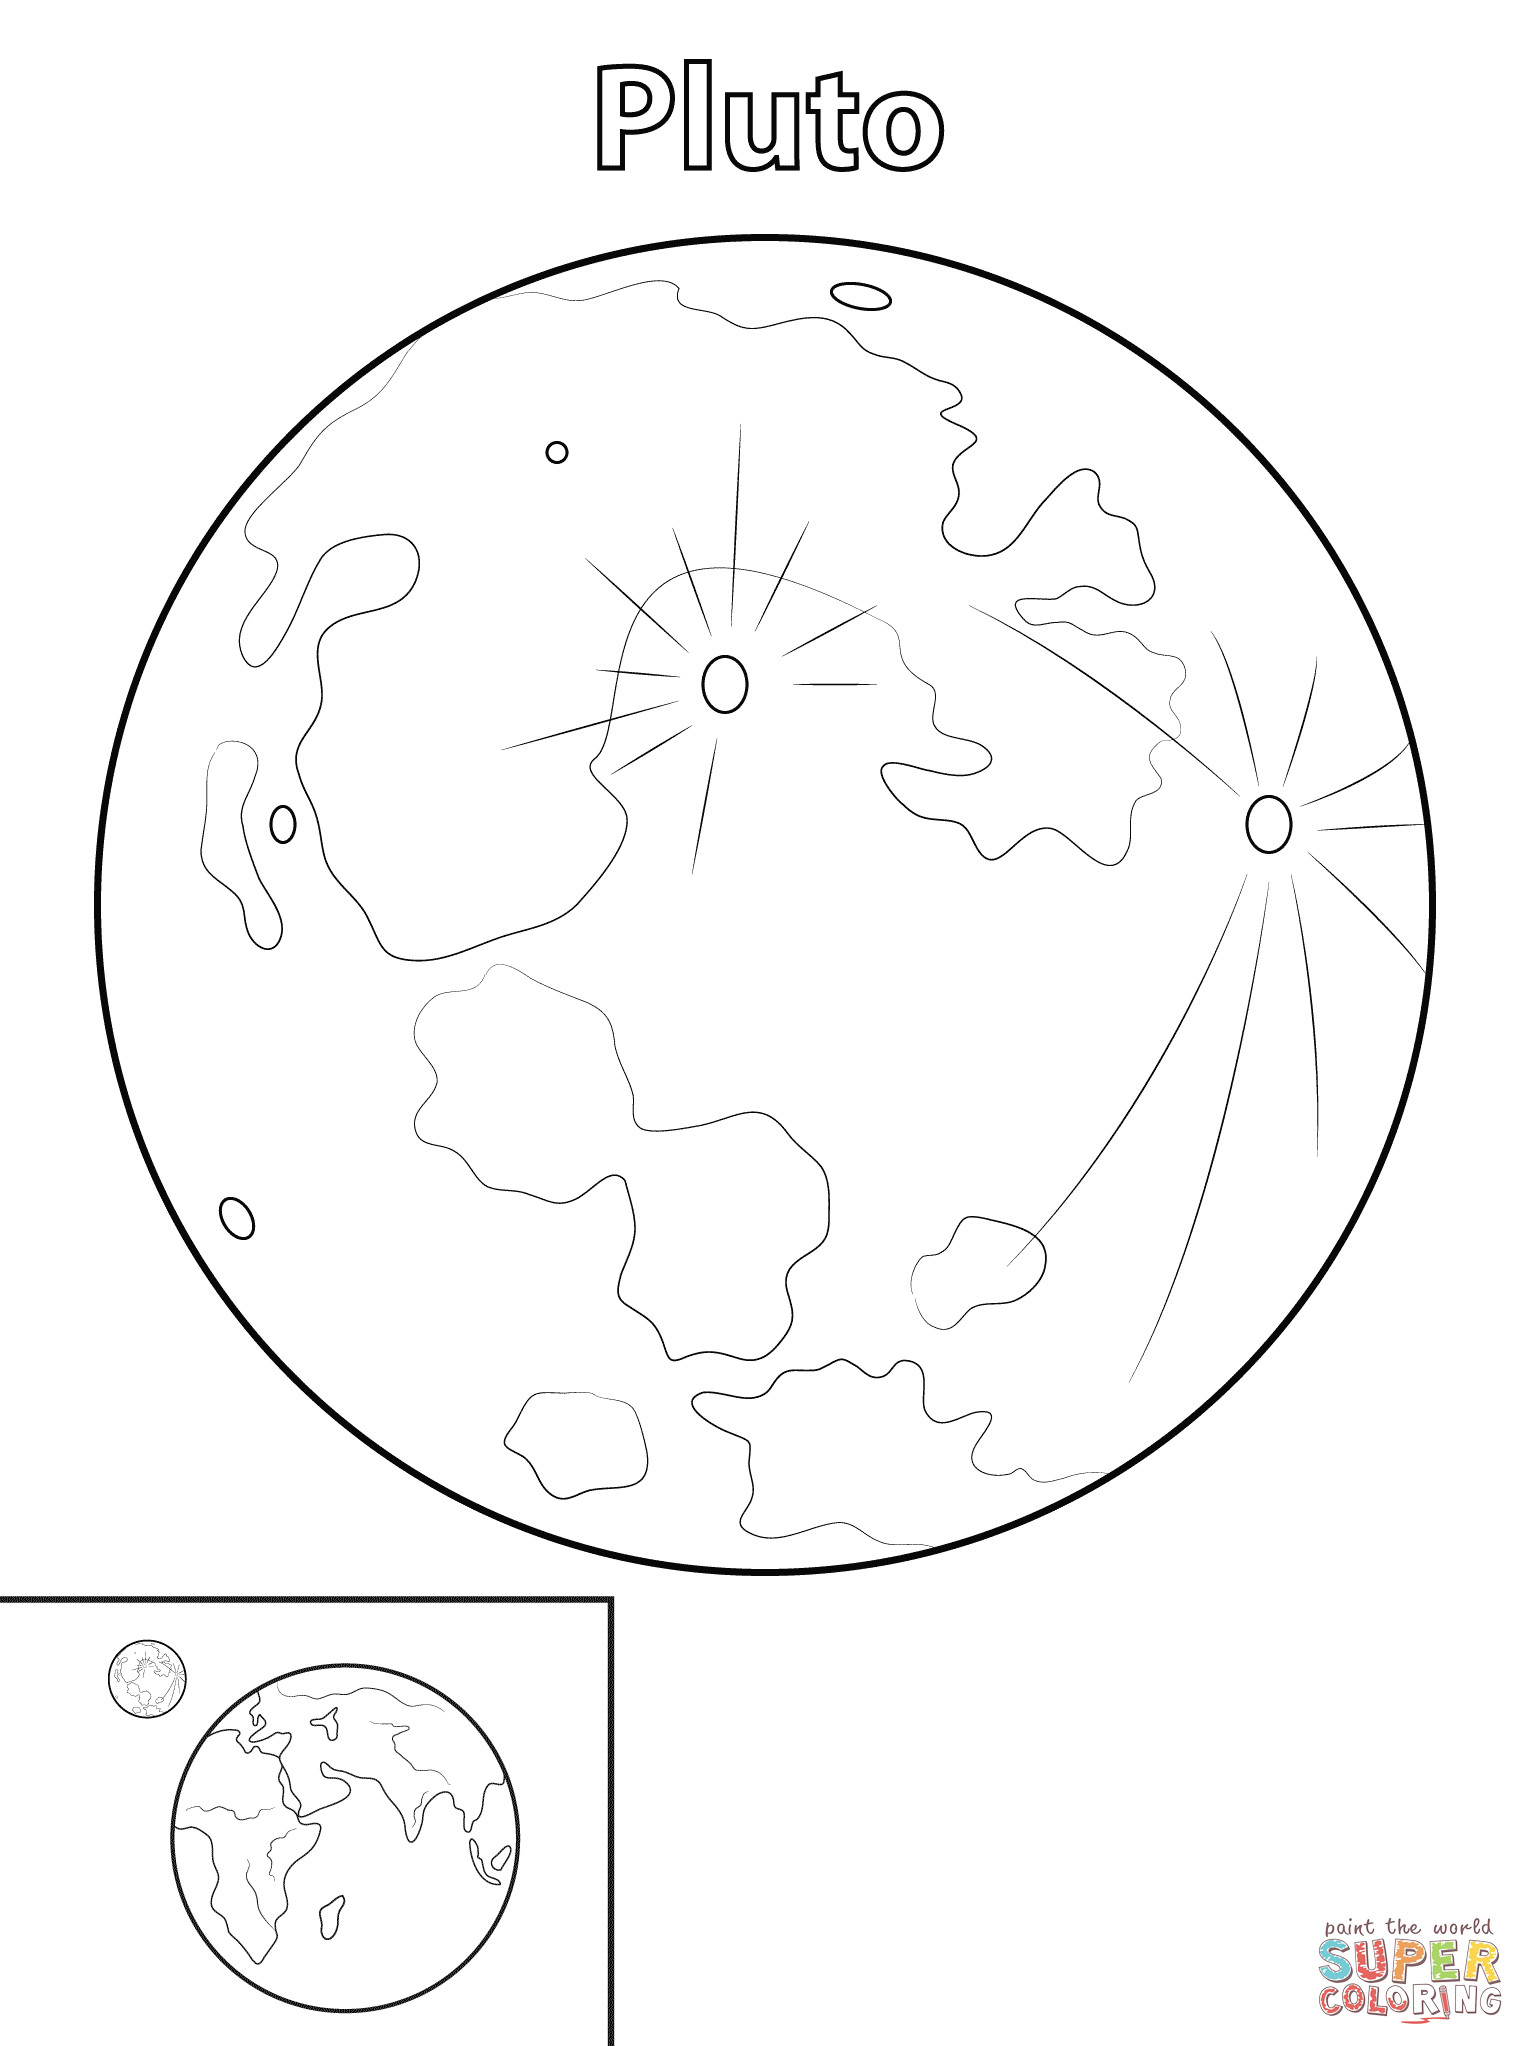 Printable Planet Coloring Pages
 Pluto Planet coloring page